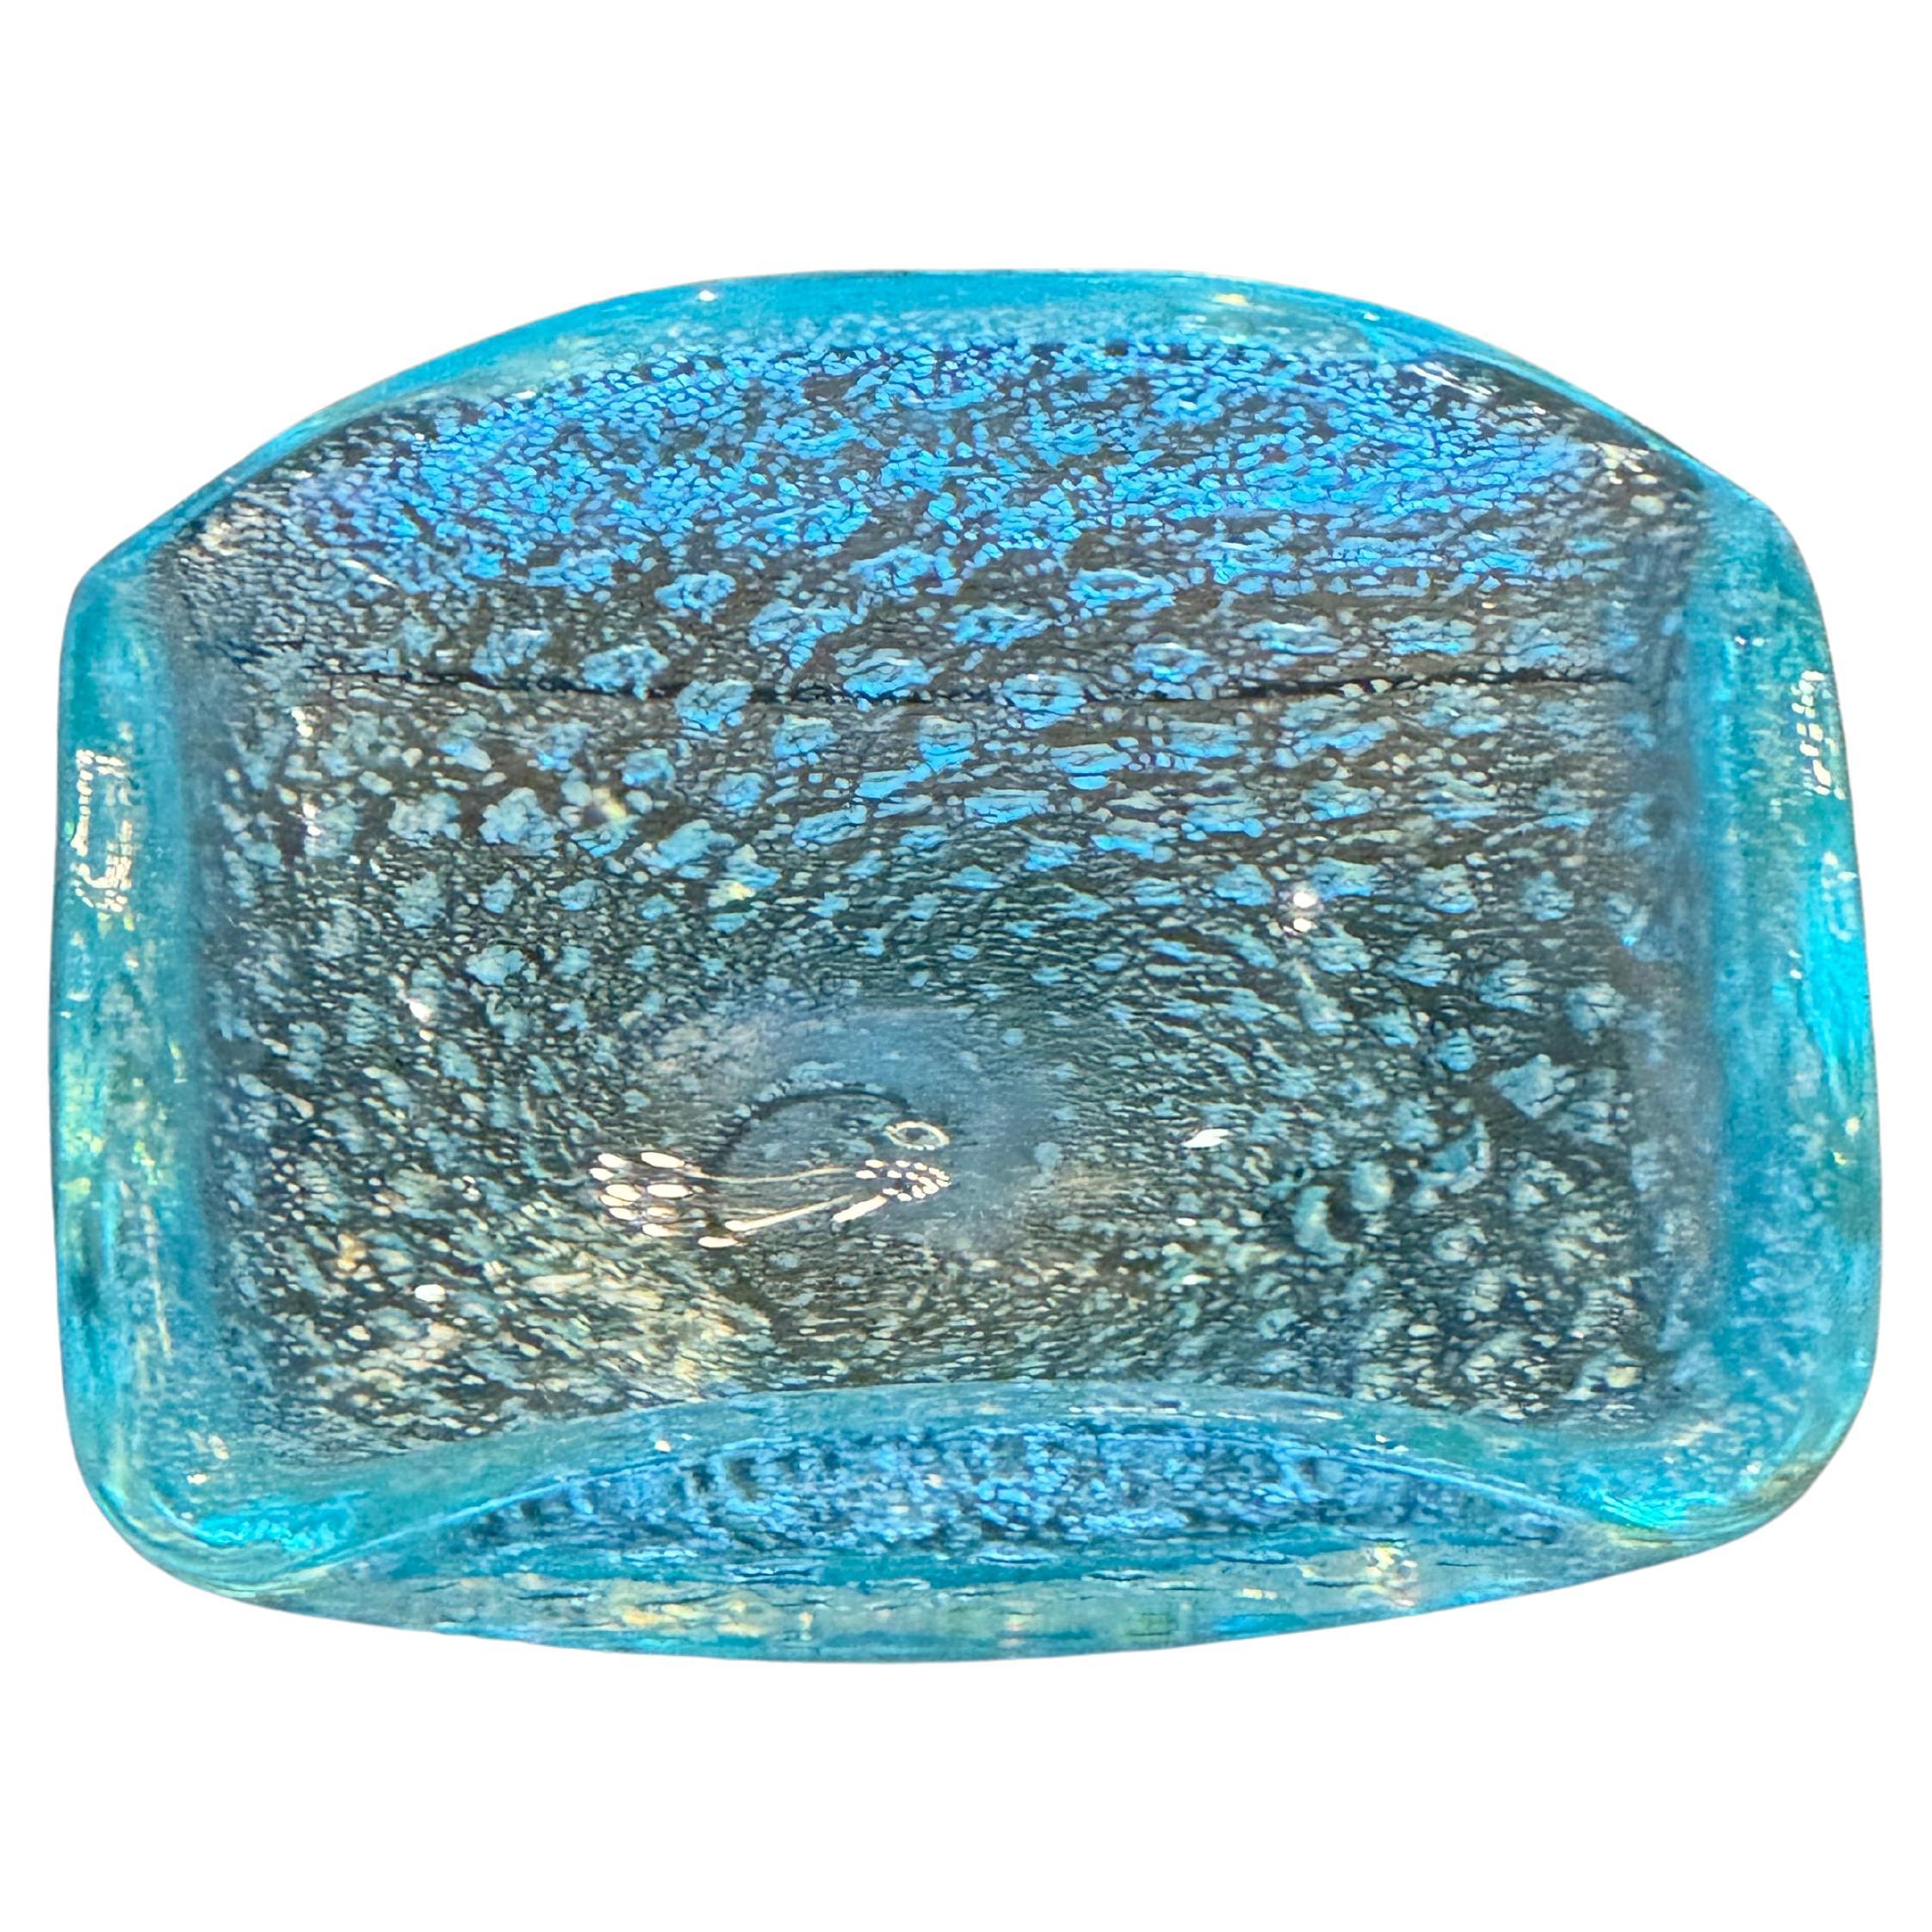 Decorative Bubble Dish with Fishnet Hand-Blown inclusions
Turquoise and teal bubbling with gusseted rounded edges 
Sourced from Italy by Martyn Lawrence Bullard
